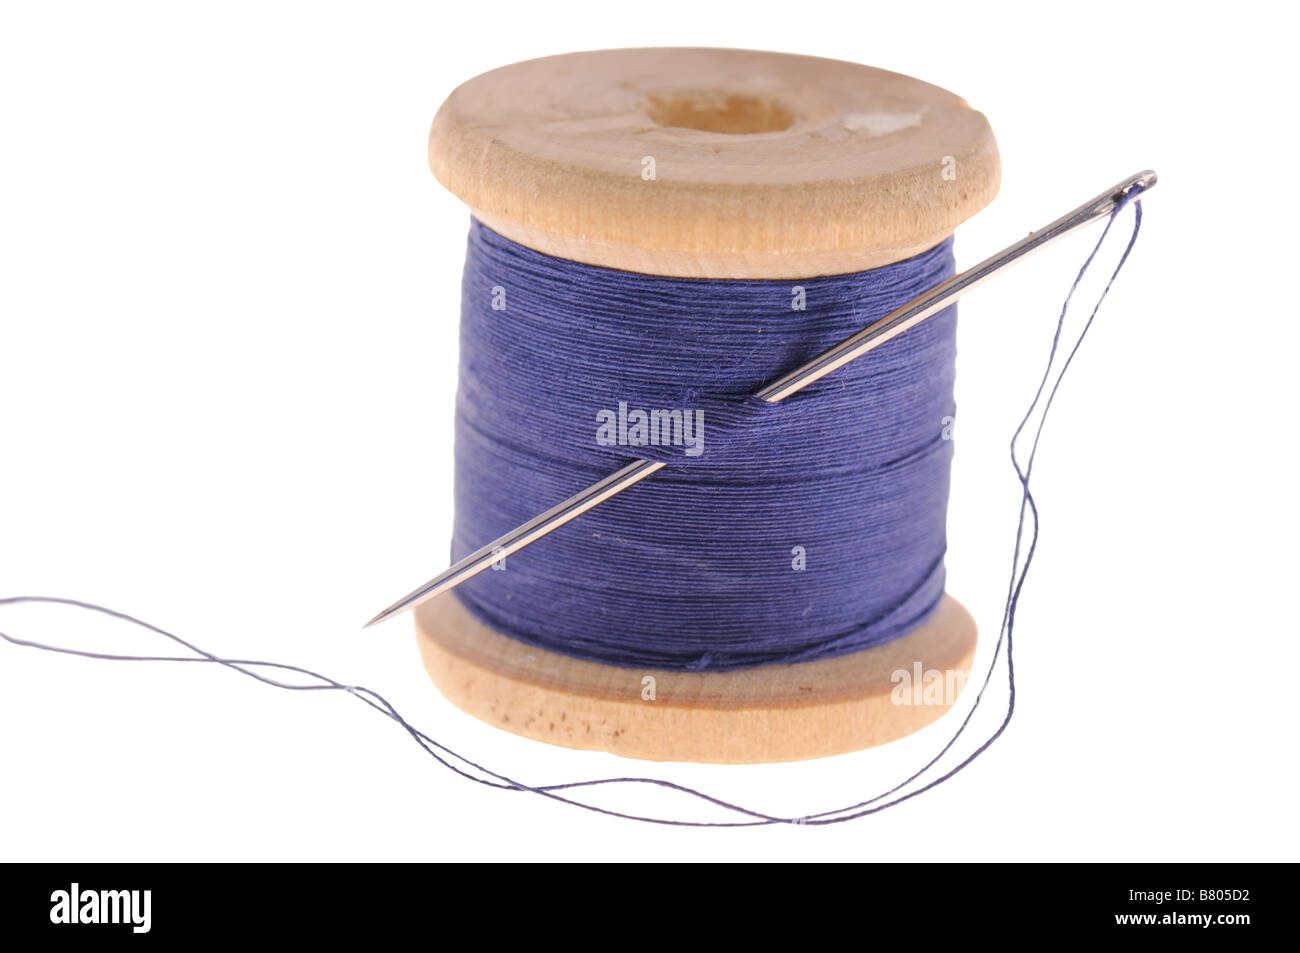 Spool of thread with needle isolated on white background. Sewing